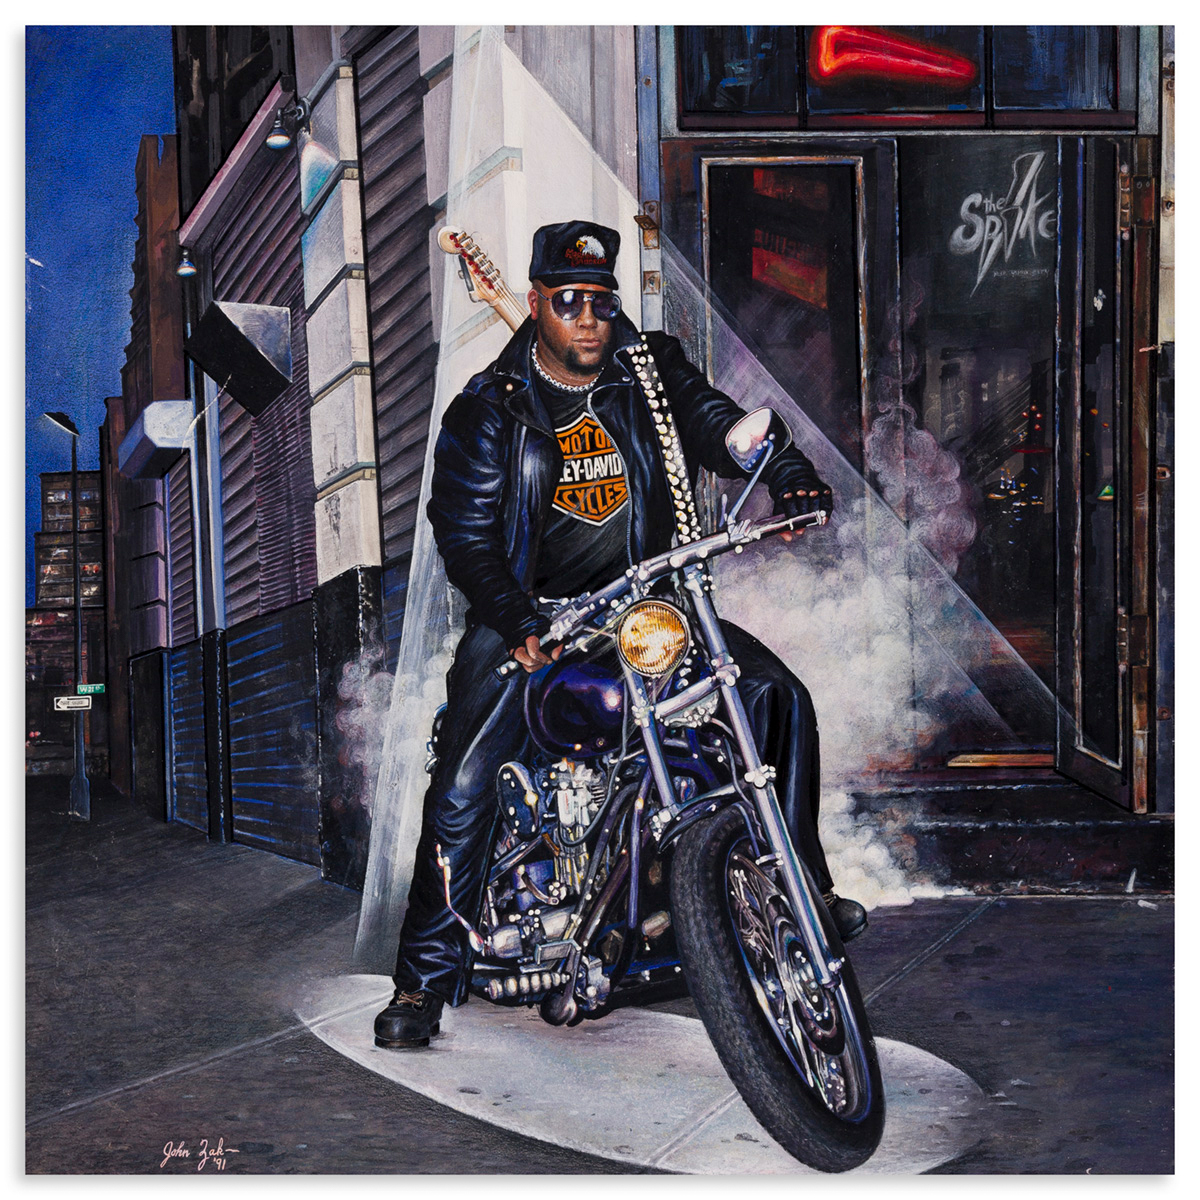 JOHN ZAK Original portrait of Chuck C.T. Thompson which hung at his popular New York leather bar, The Spike.